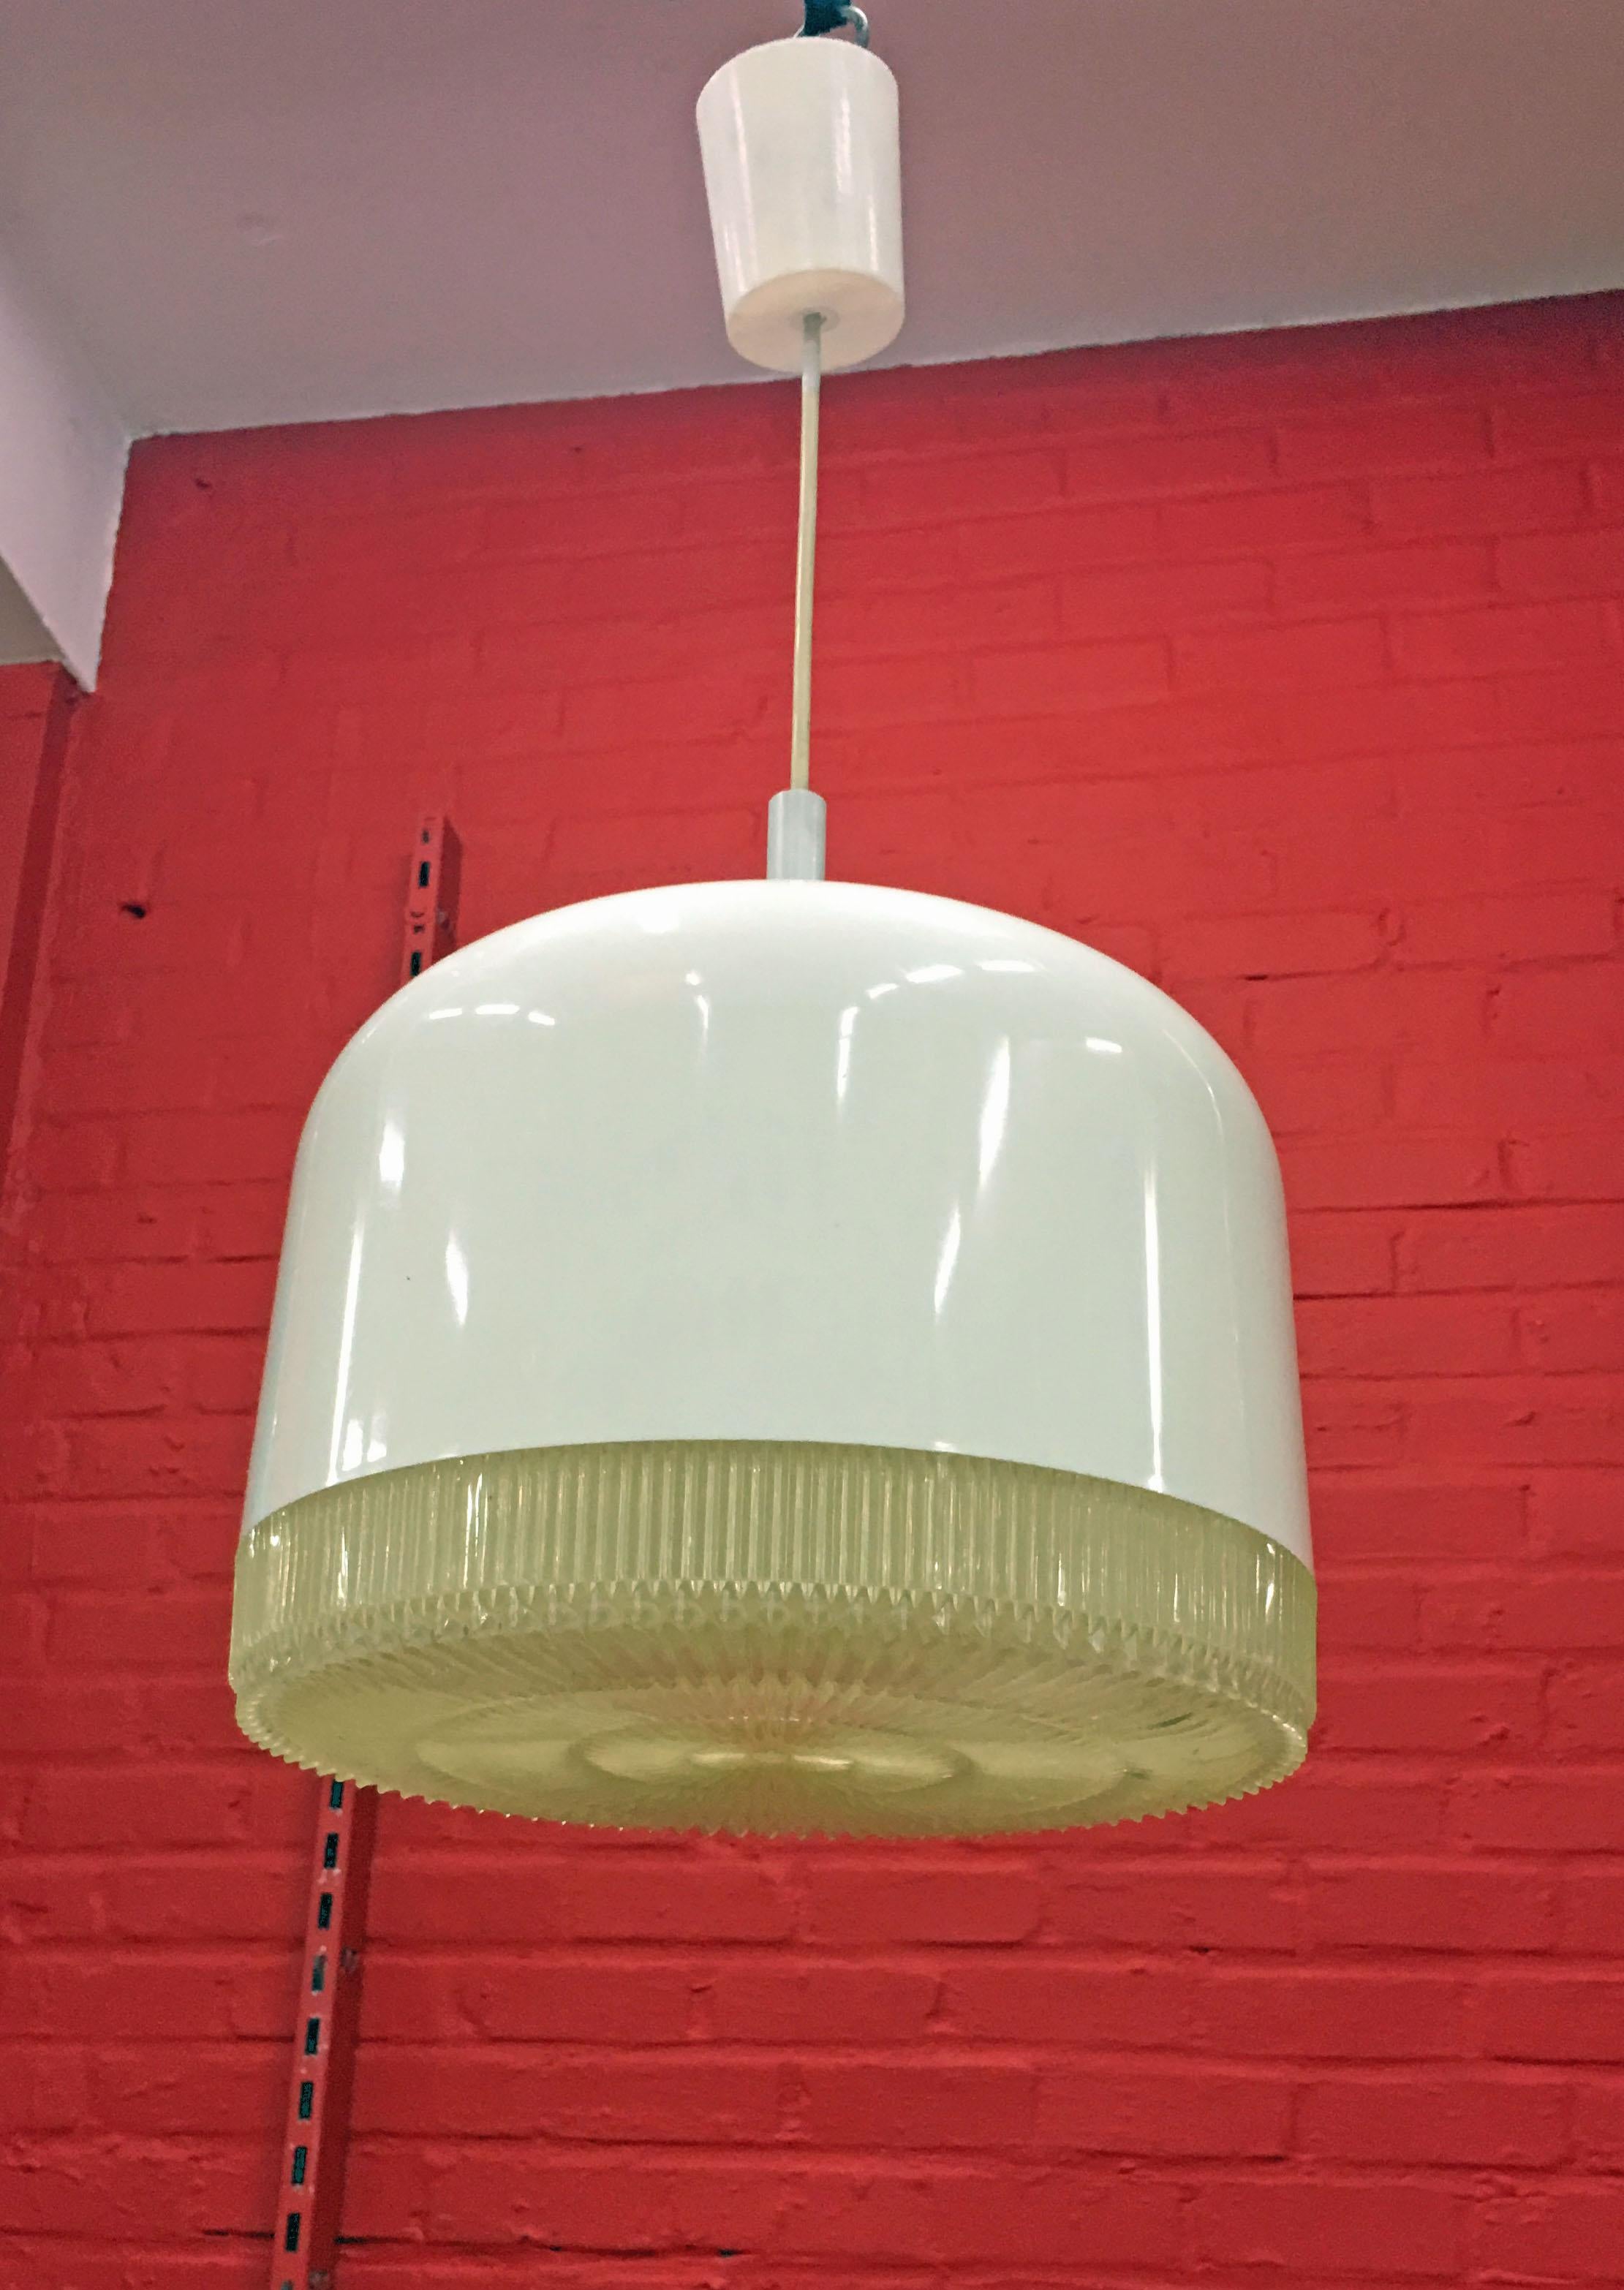 6 plastic pendant lights, circa 1970.
height of the lamp alone: 21 cm (9.45'')
the wire can easily be replaced to change the overall height